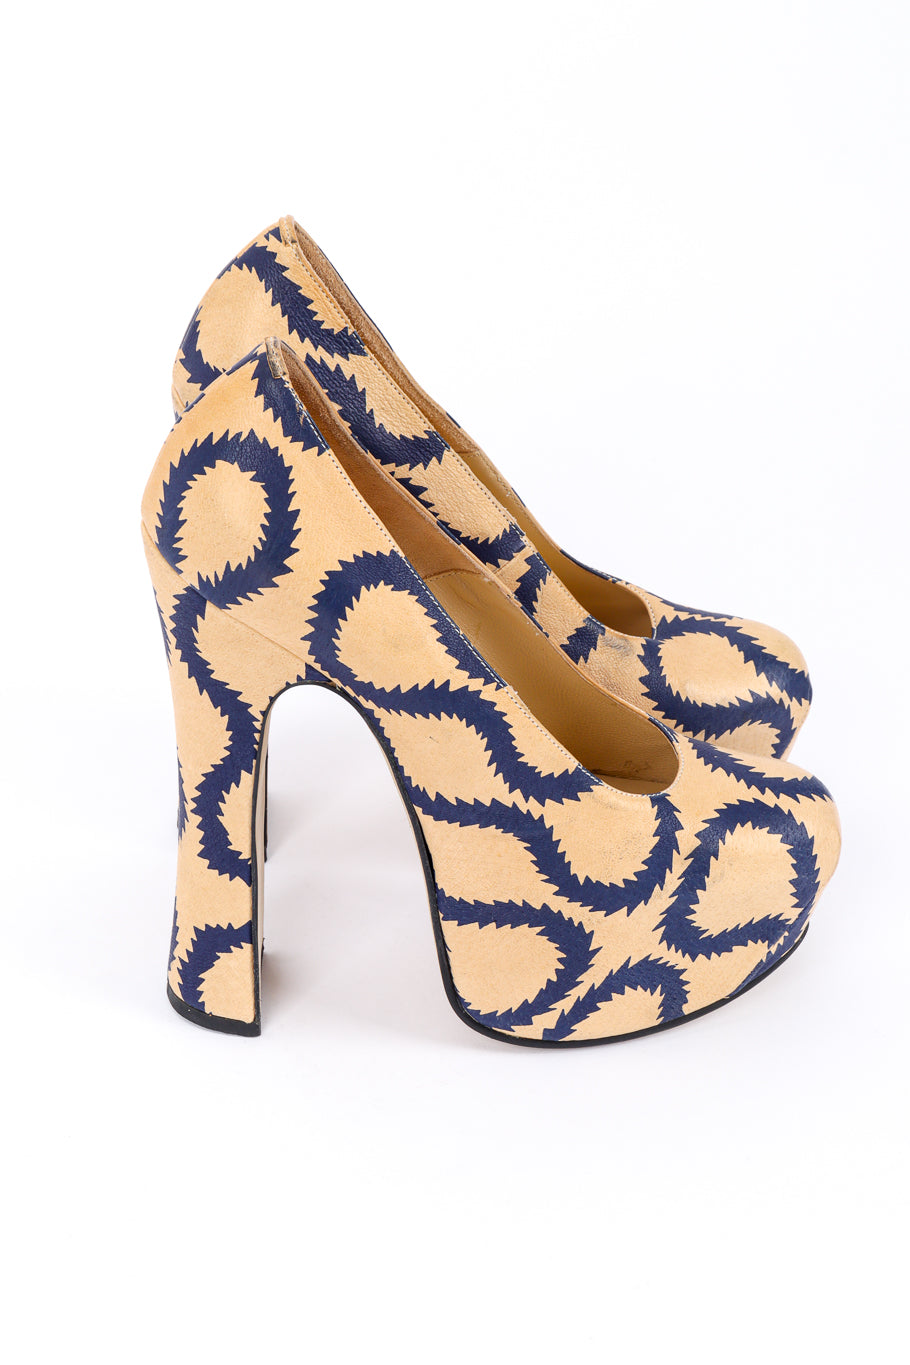 Vivienne Westwood 2013 F/W Squiggle Print Leather Court Shoe right outer side @recessla